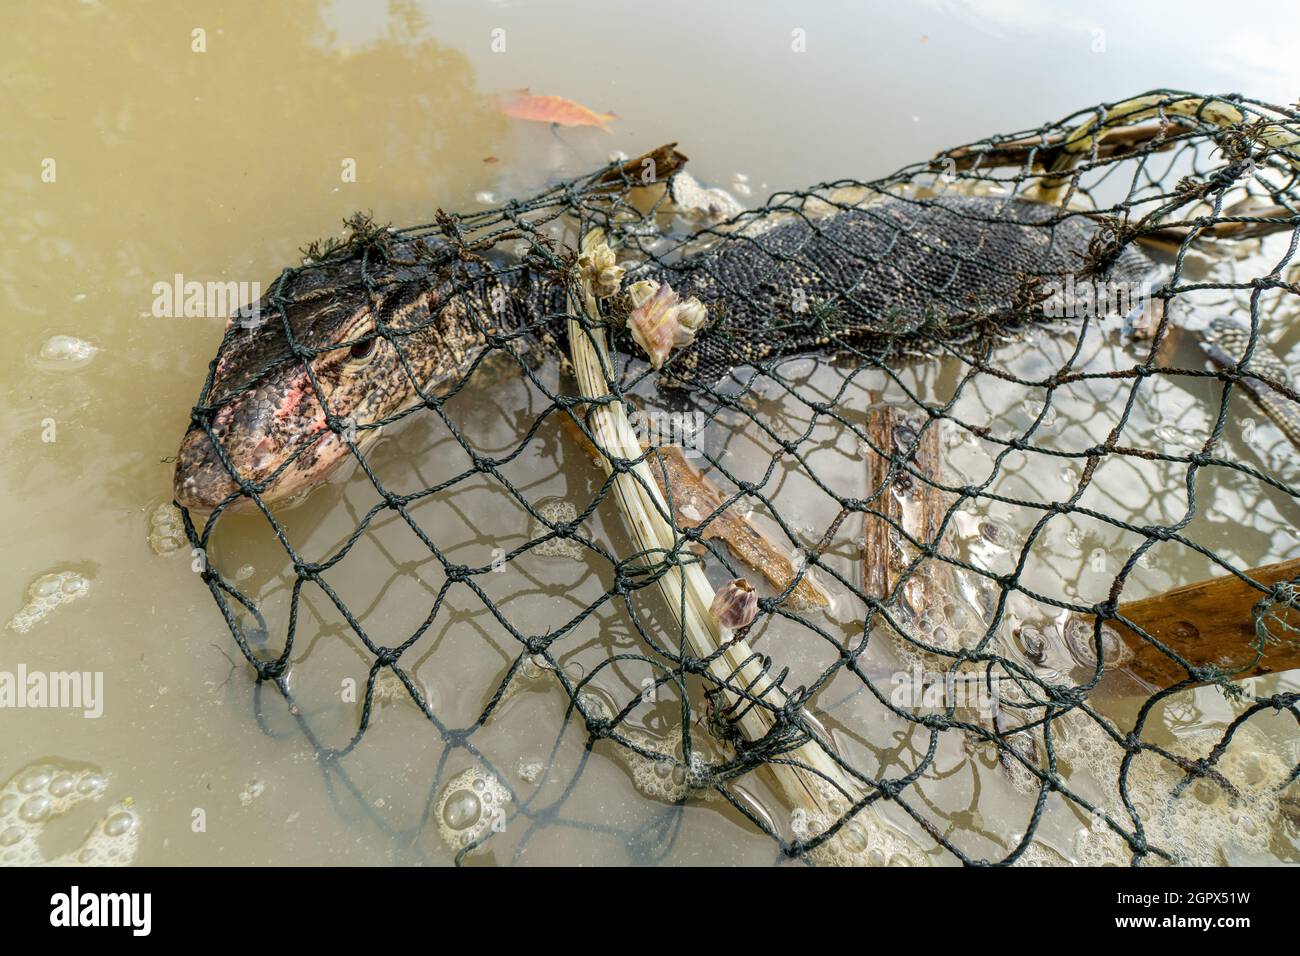 Closeup of the monitor lizard accidentally trapped in a crab trap